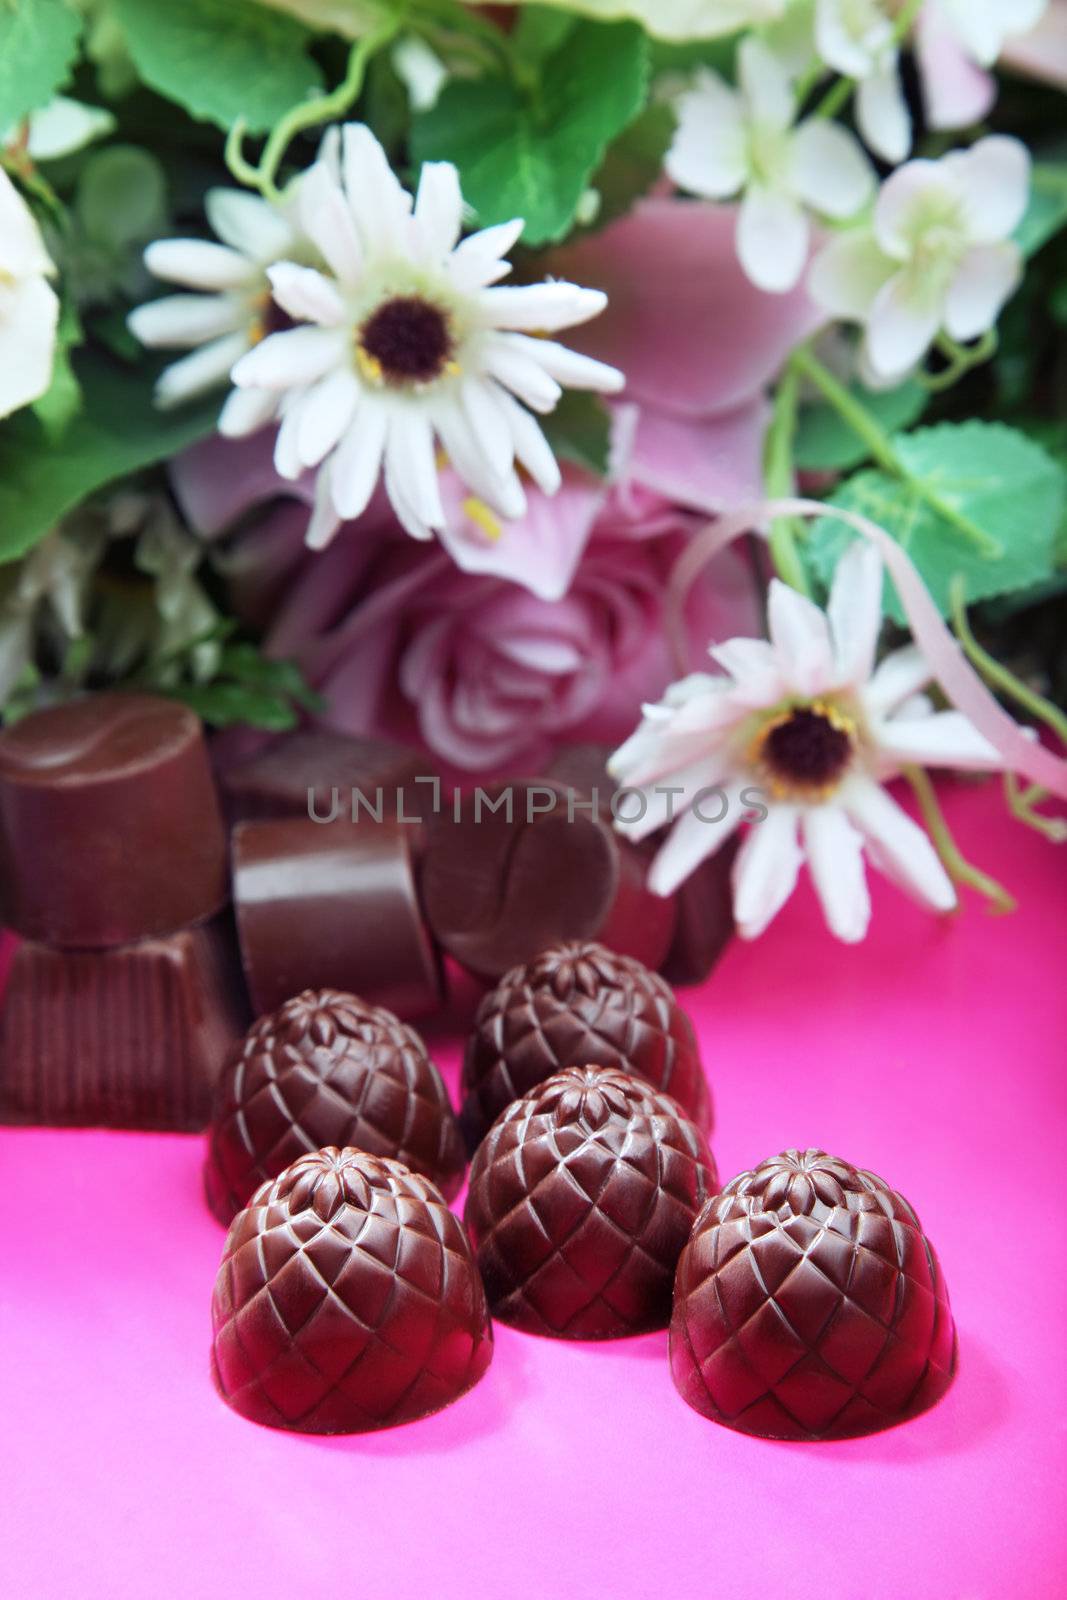 Chocolate sweets and flowers for the Valentine's Day